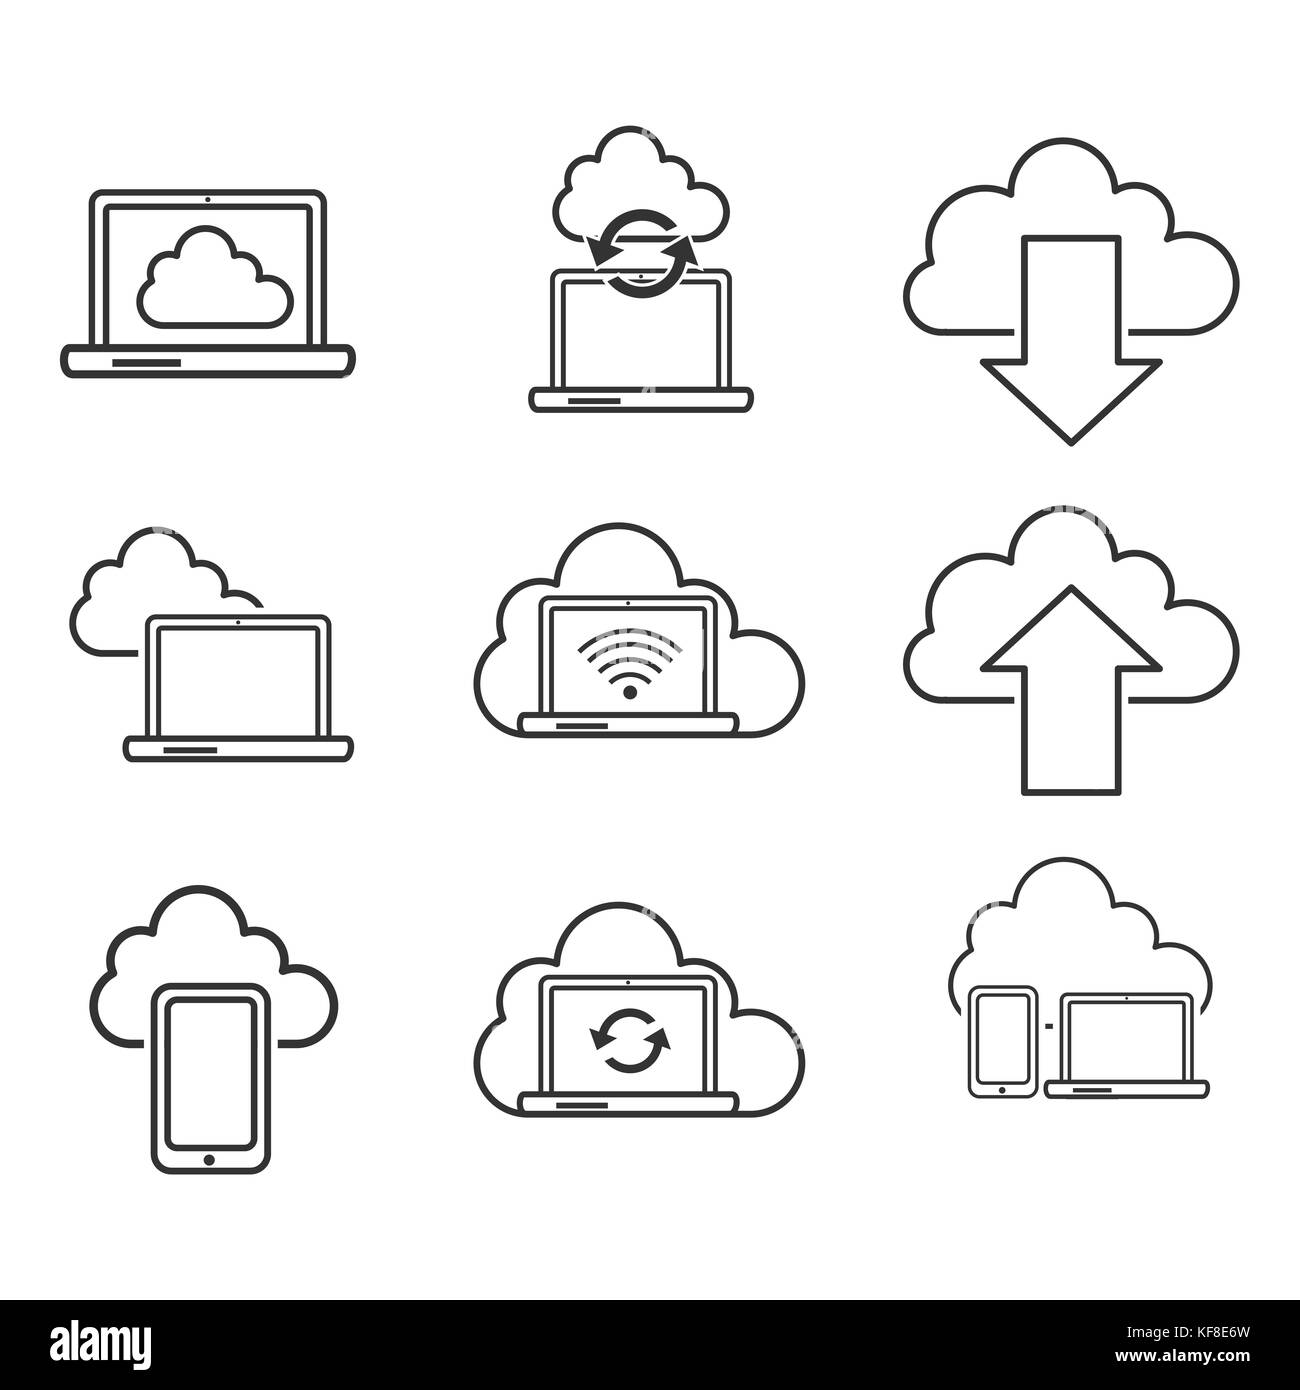 Cloud icons Set, Flat internet icon collection for Web and mobile design element. Vector iconic illustration. Stock Vector